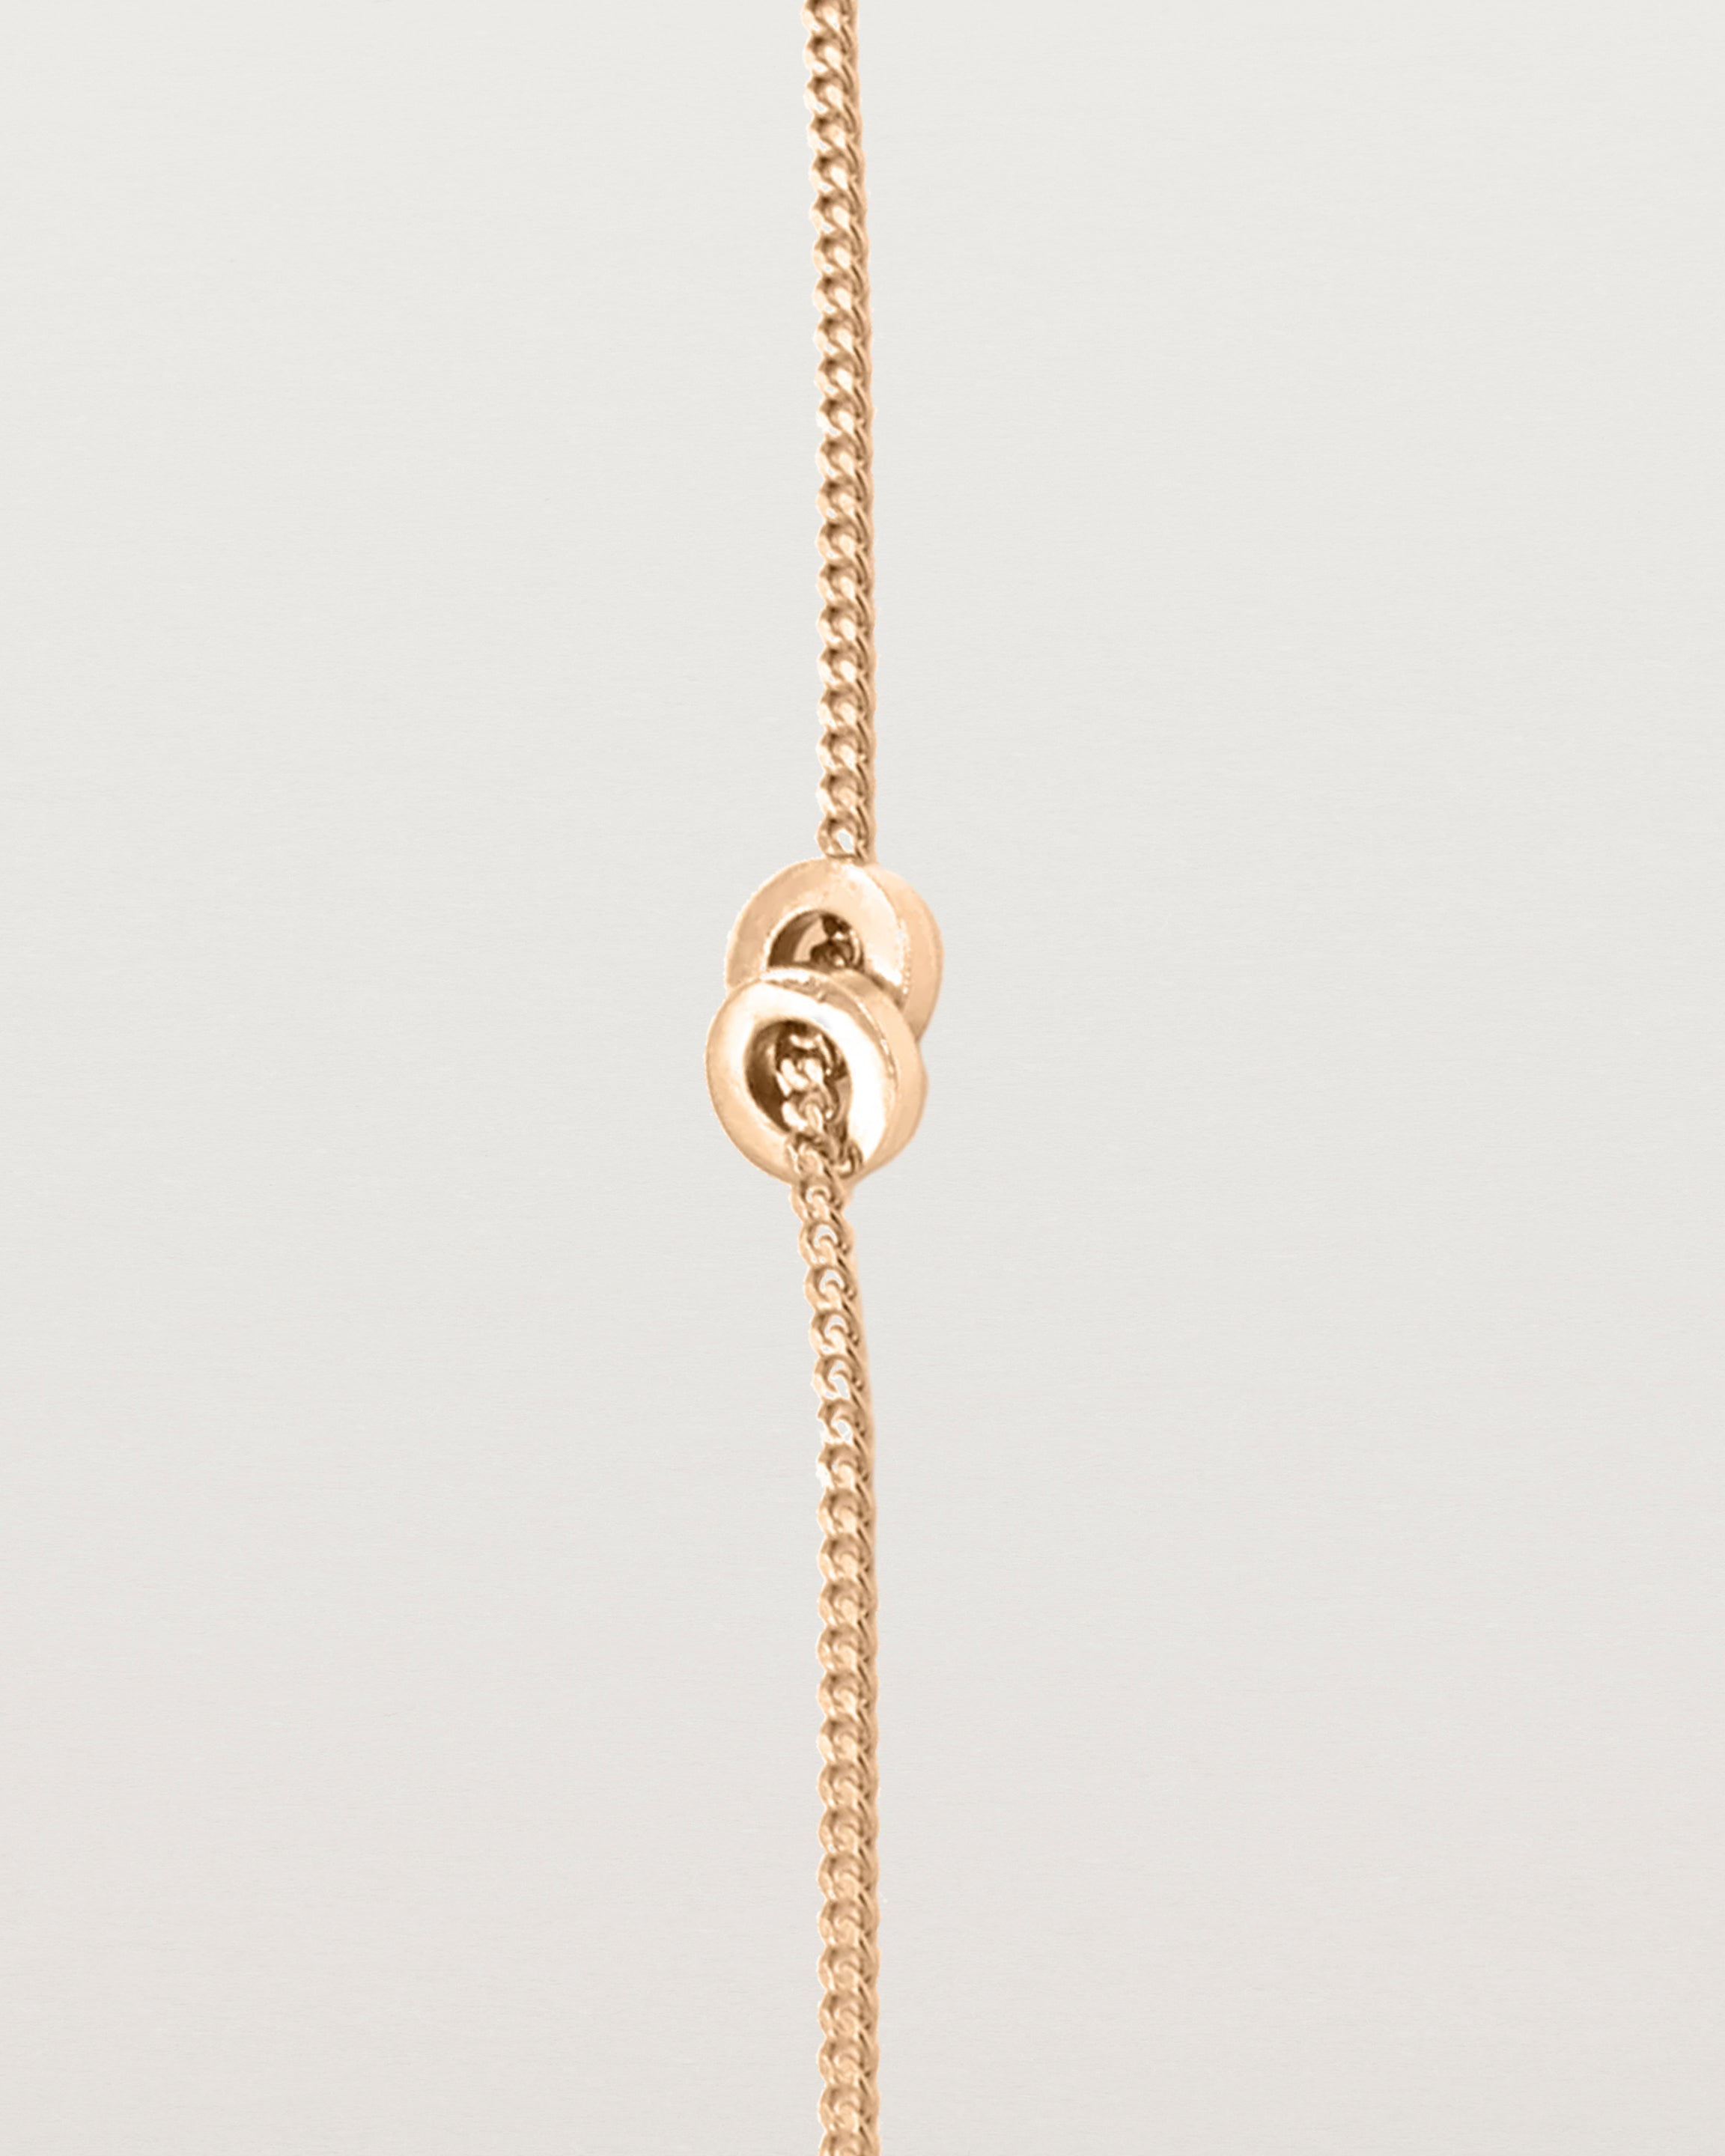 A fine rose gold chain bracelet featuring a rose gold circular charm